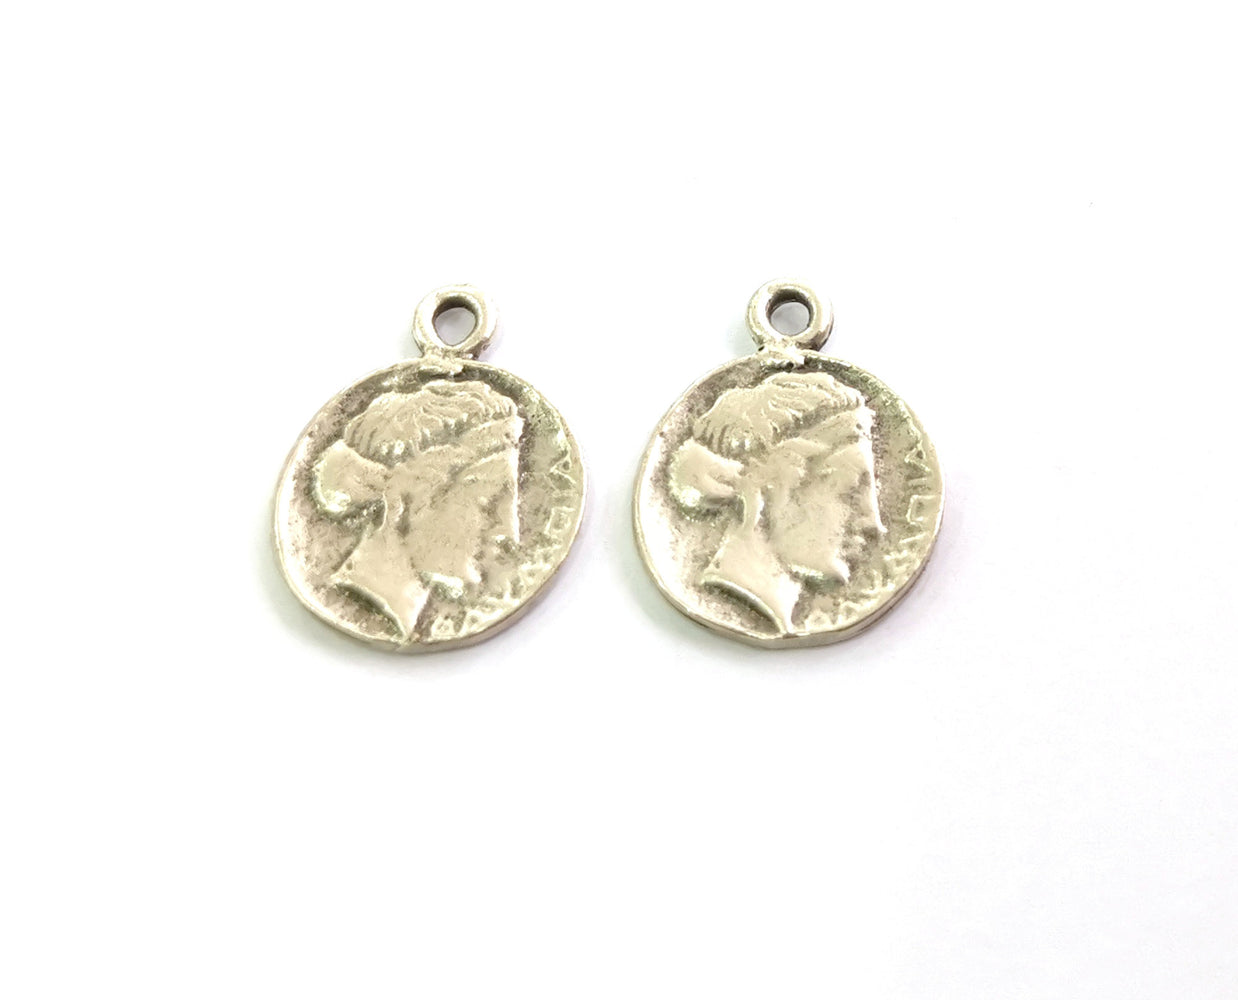 4 Coin Charms Antique Silver Plated Charms  (22x17 mm)  G18596